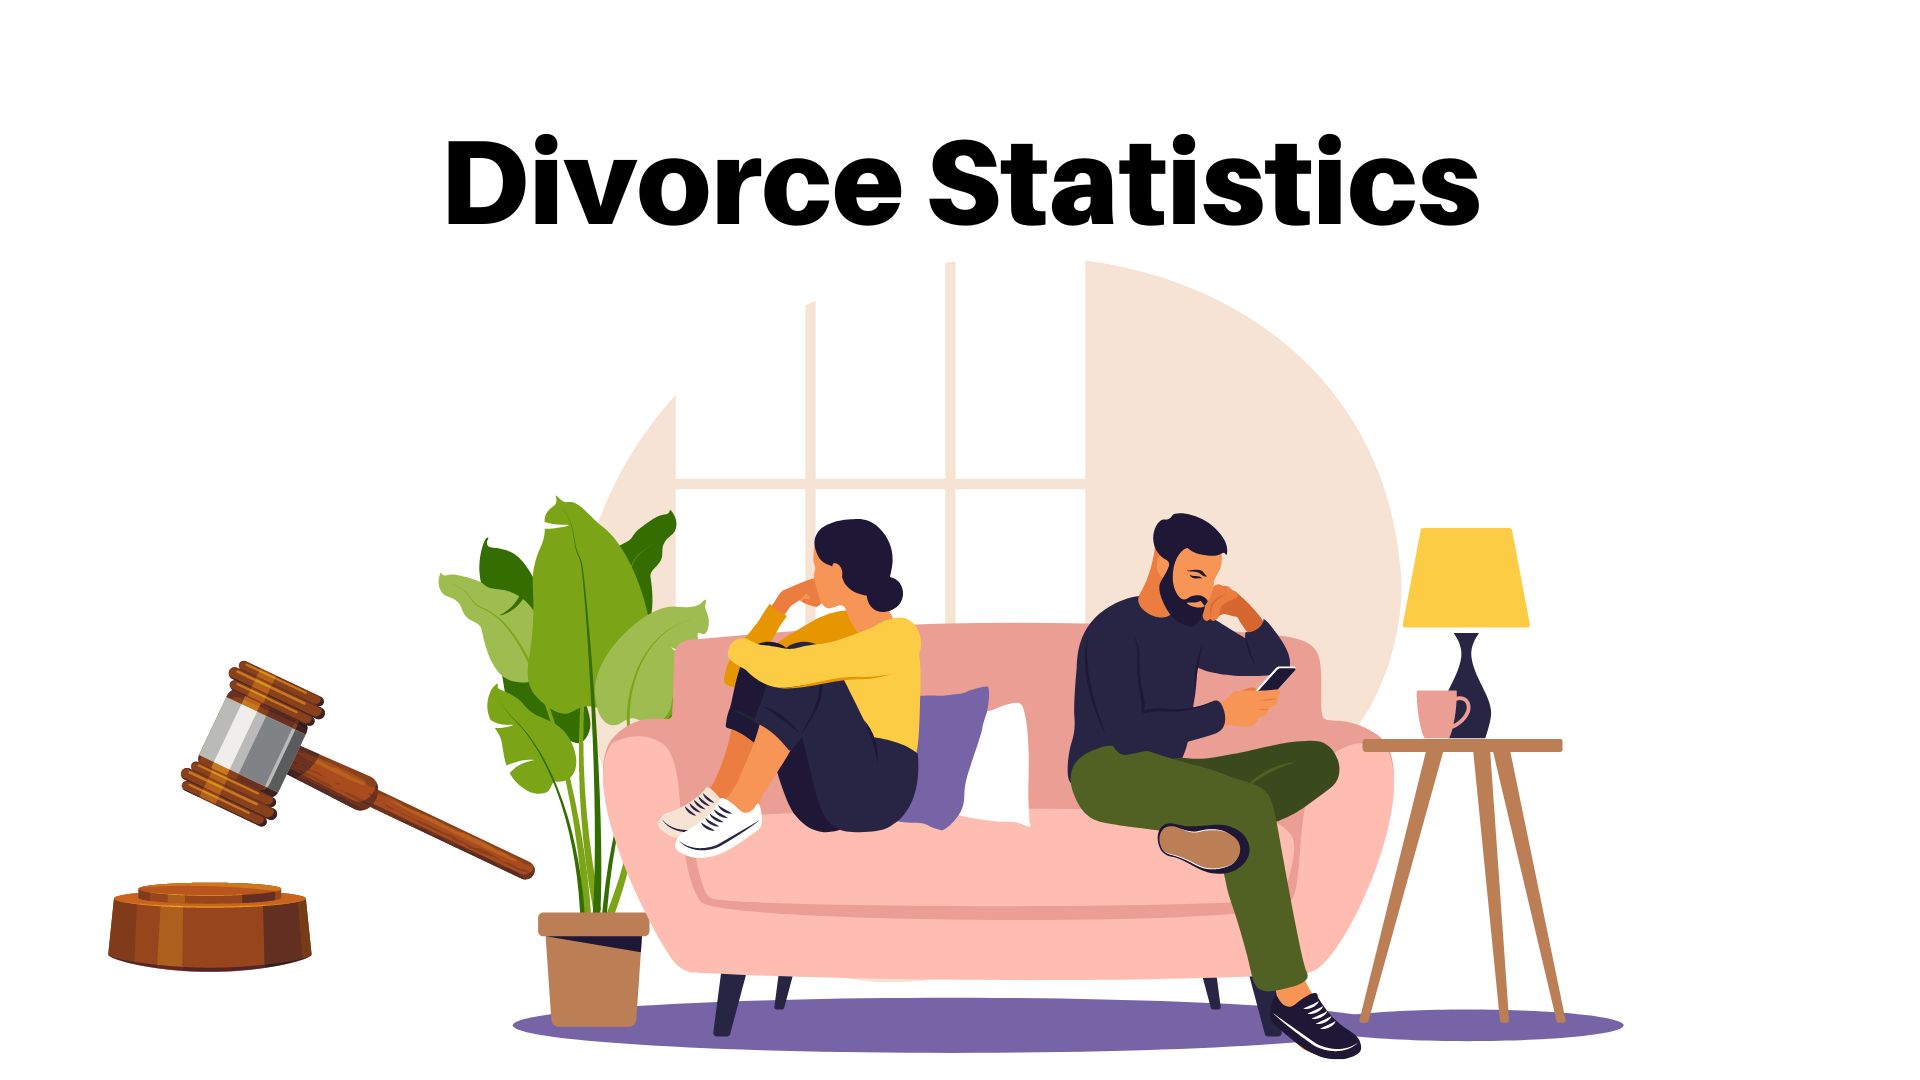 2022 Divorce Statistics and Facts From Around The World